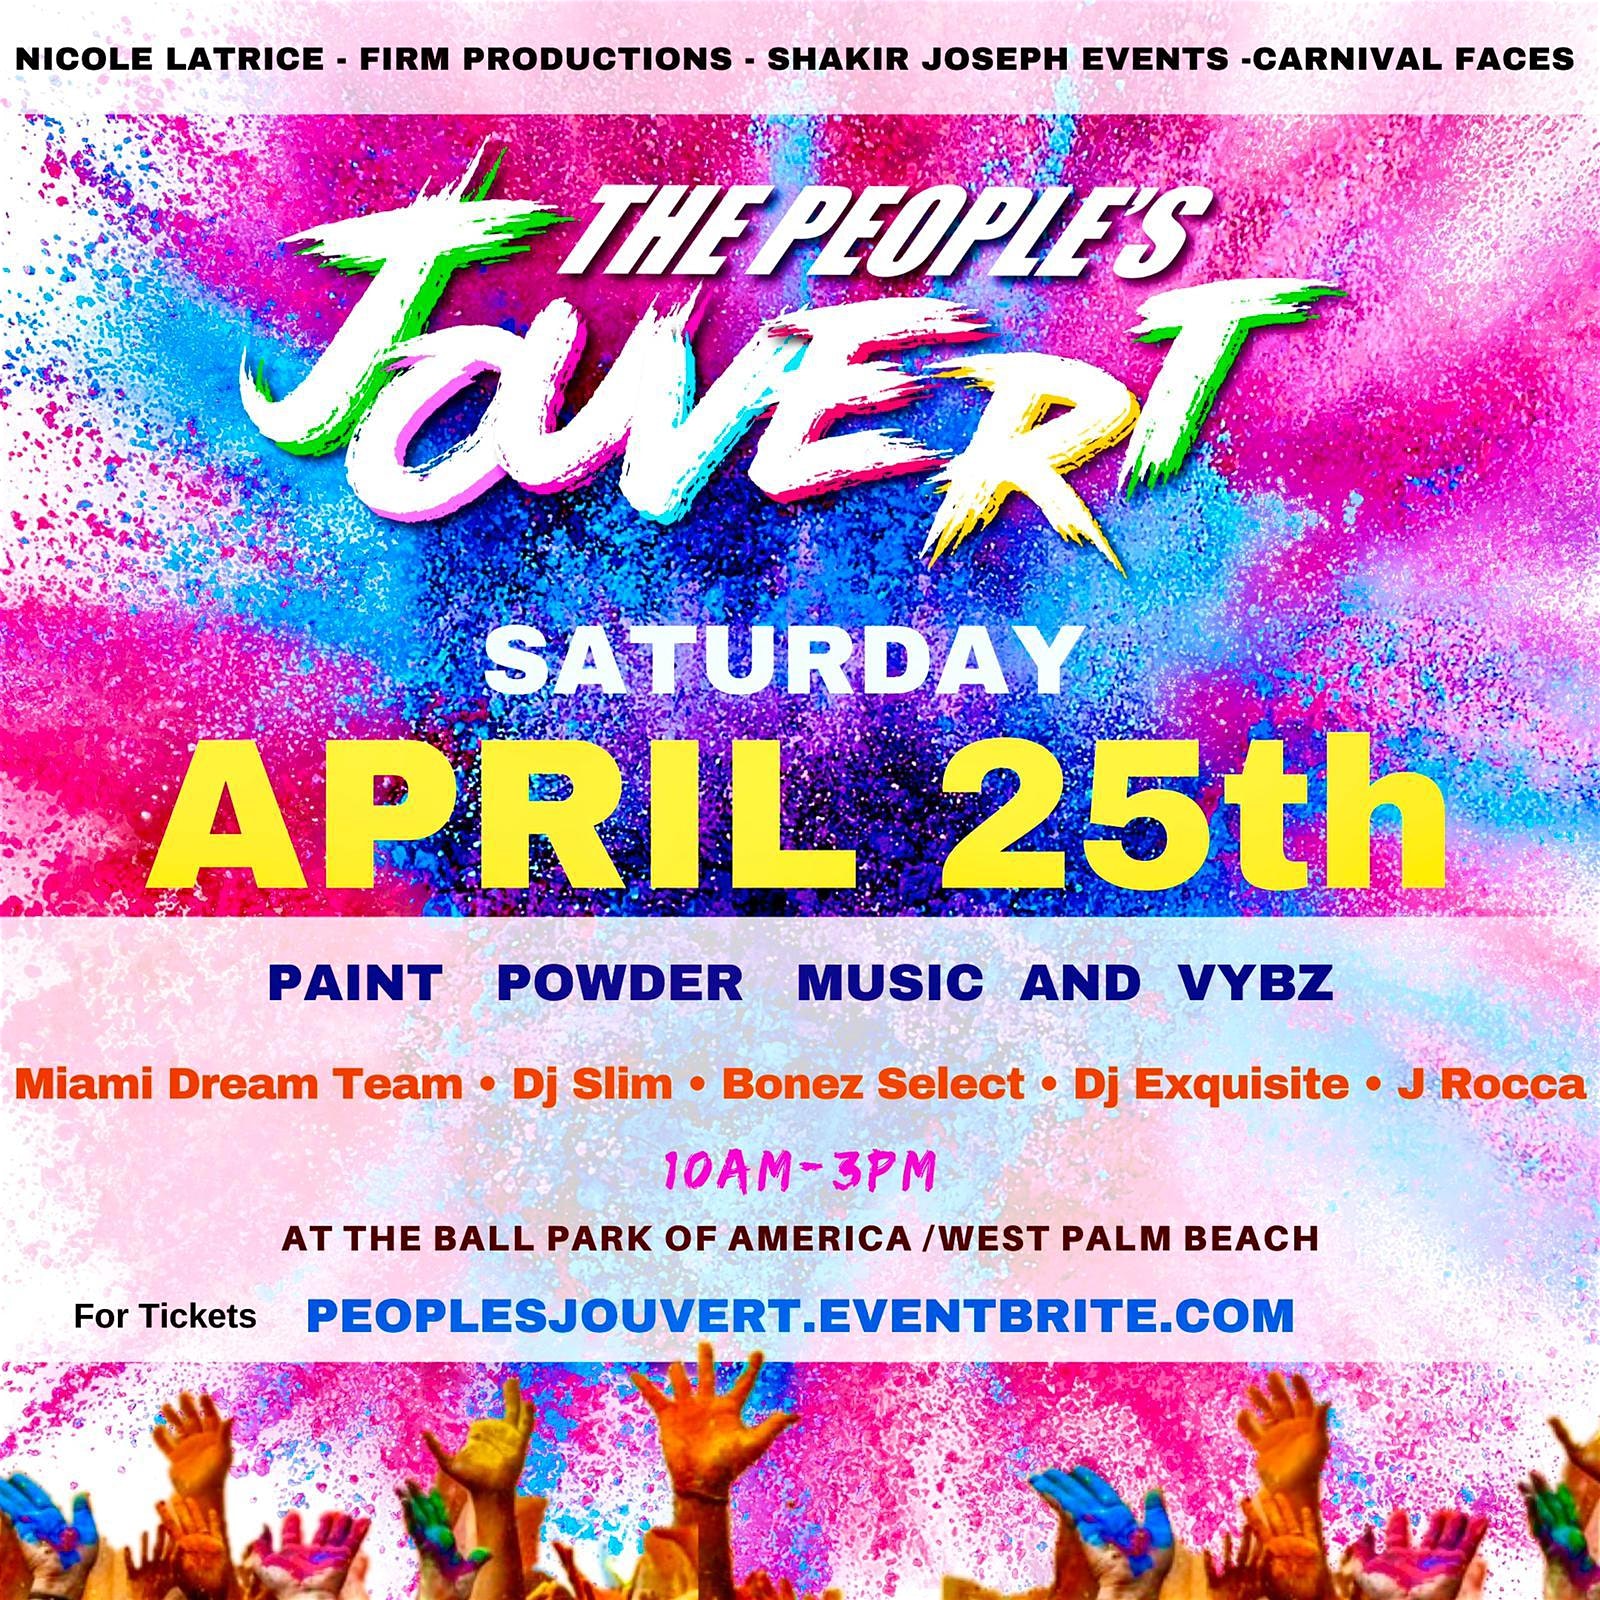 The People’s Jouvert WhyiParty